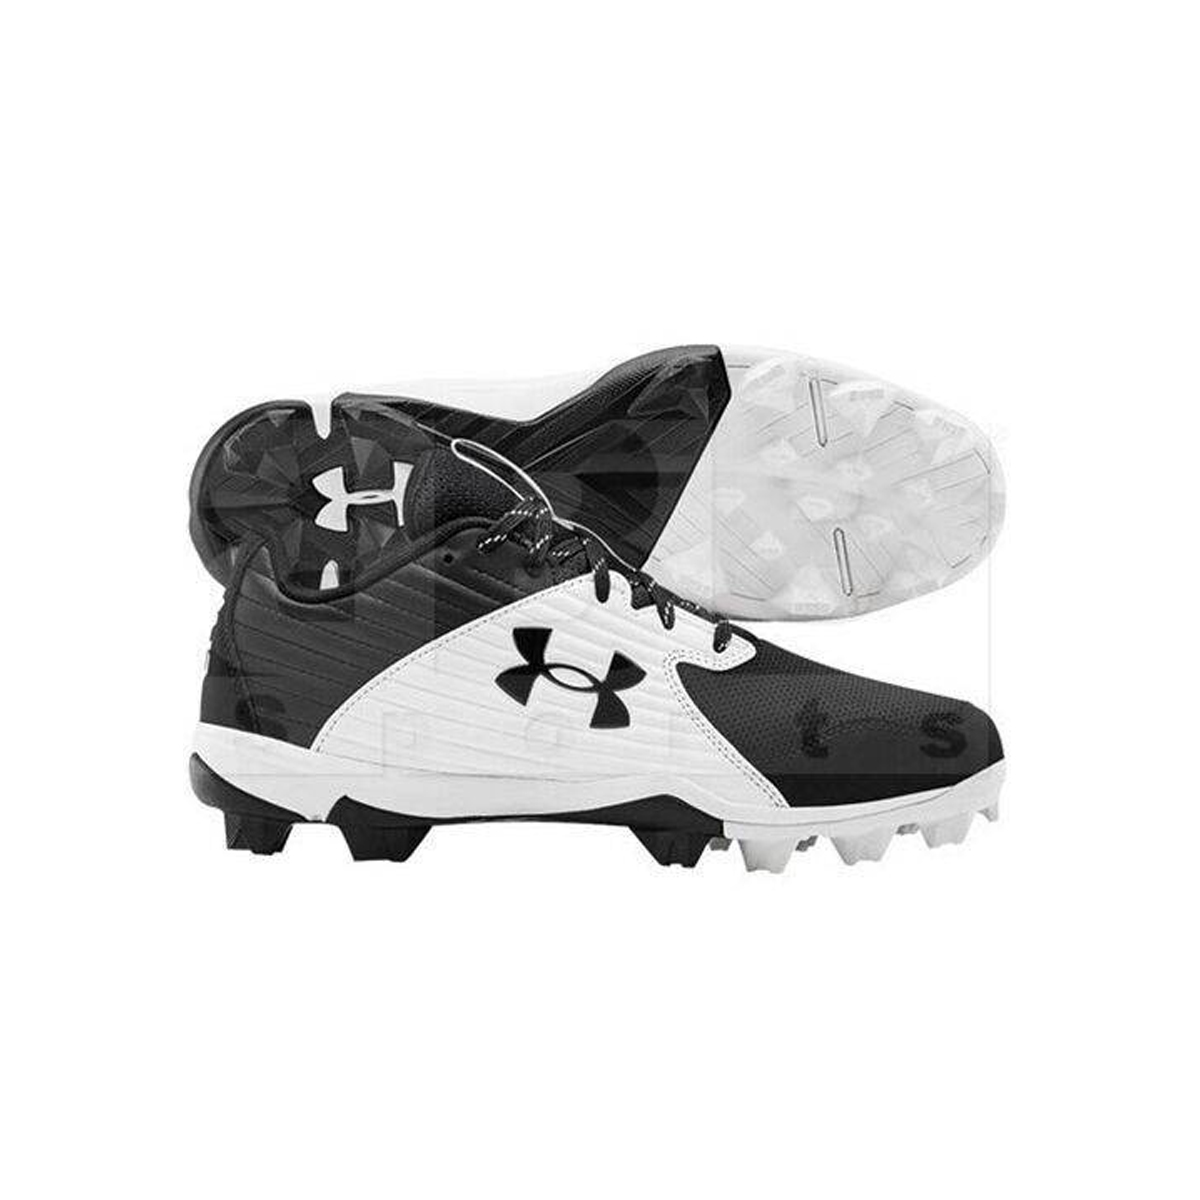  Under Armour Men's Leadoff Low Rubber Molded Cleat Shoe,  Baseball Gray, 6.5